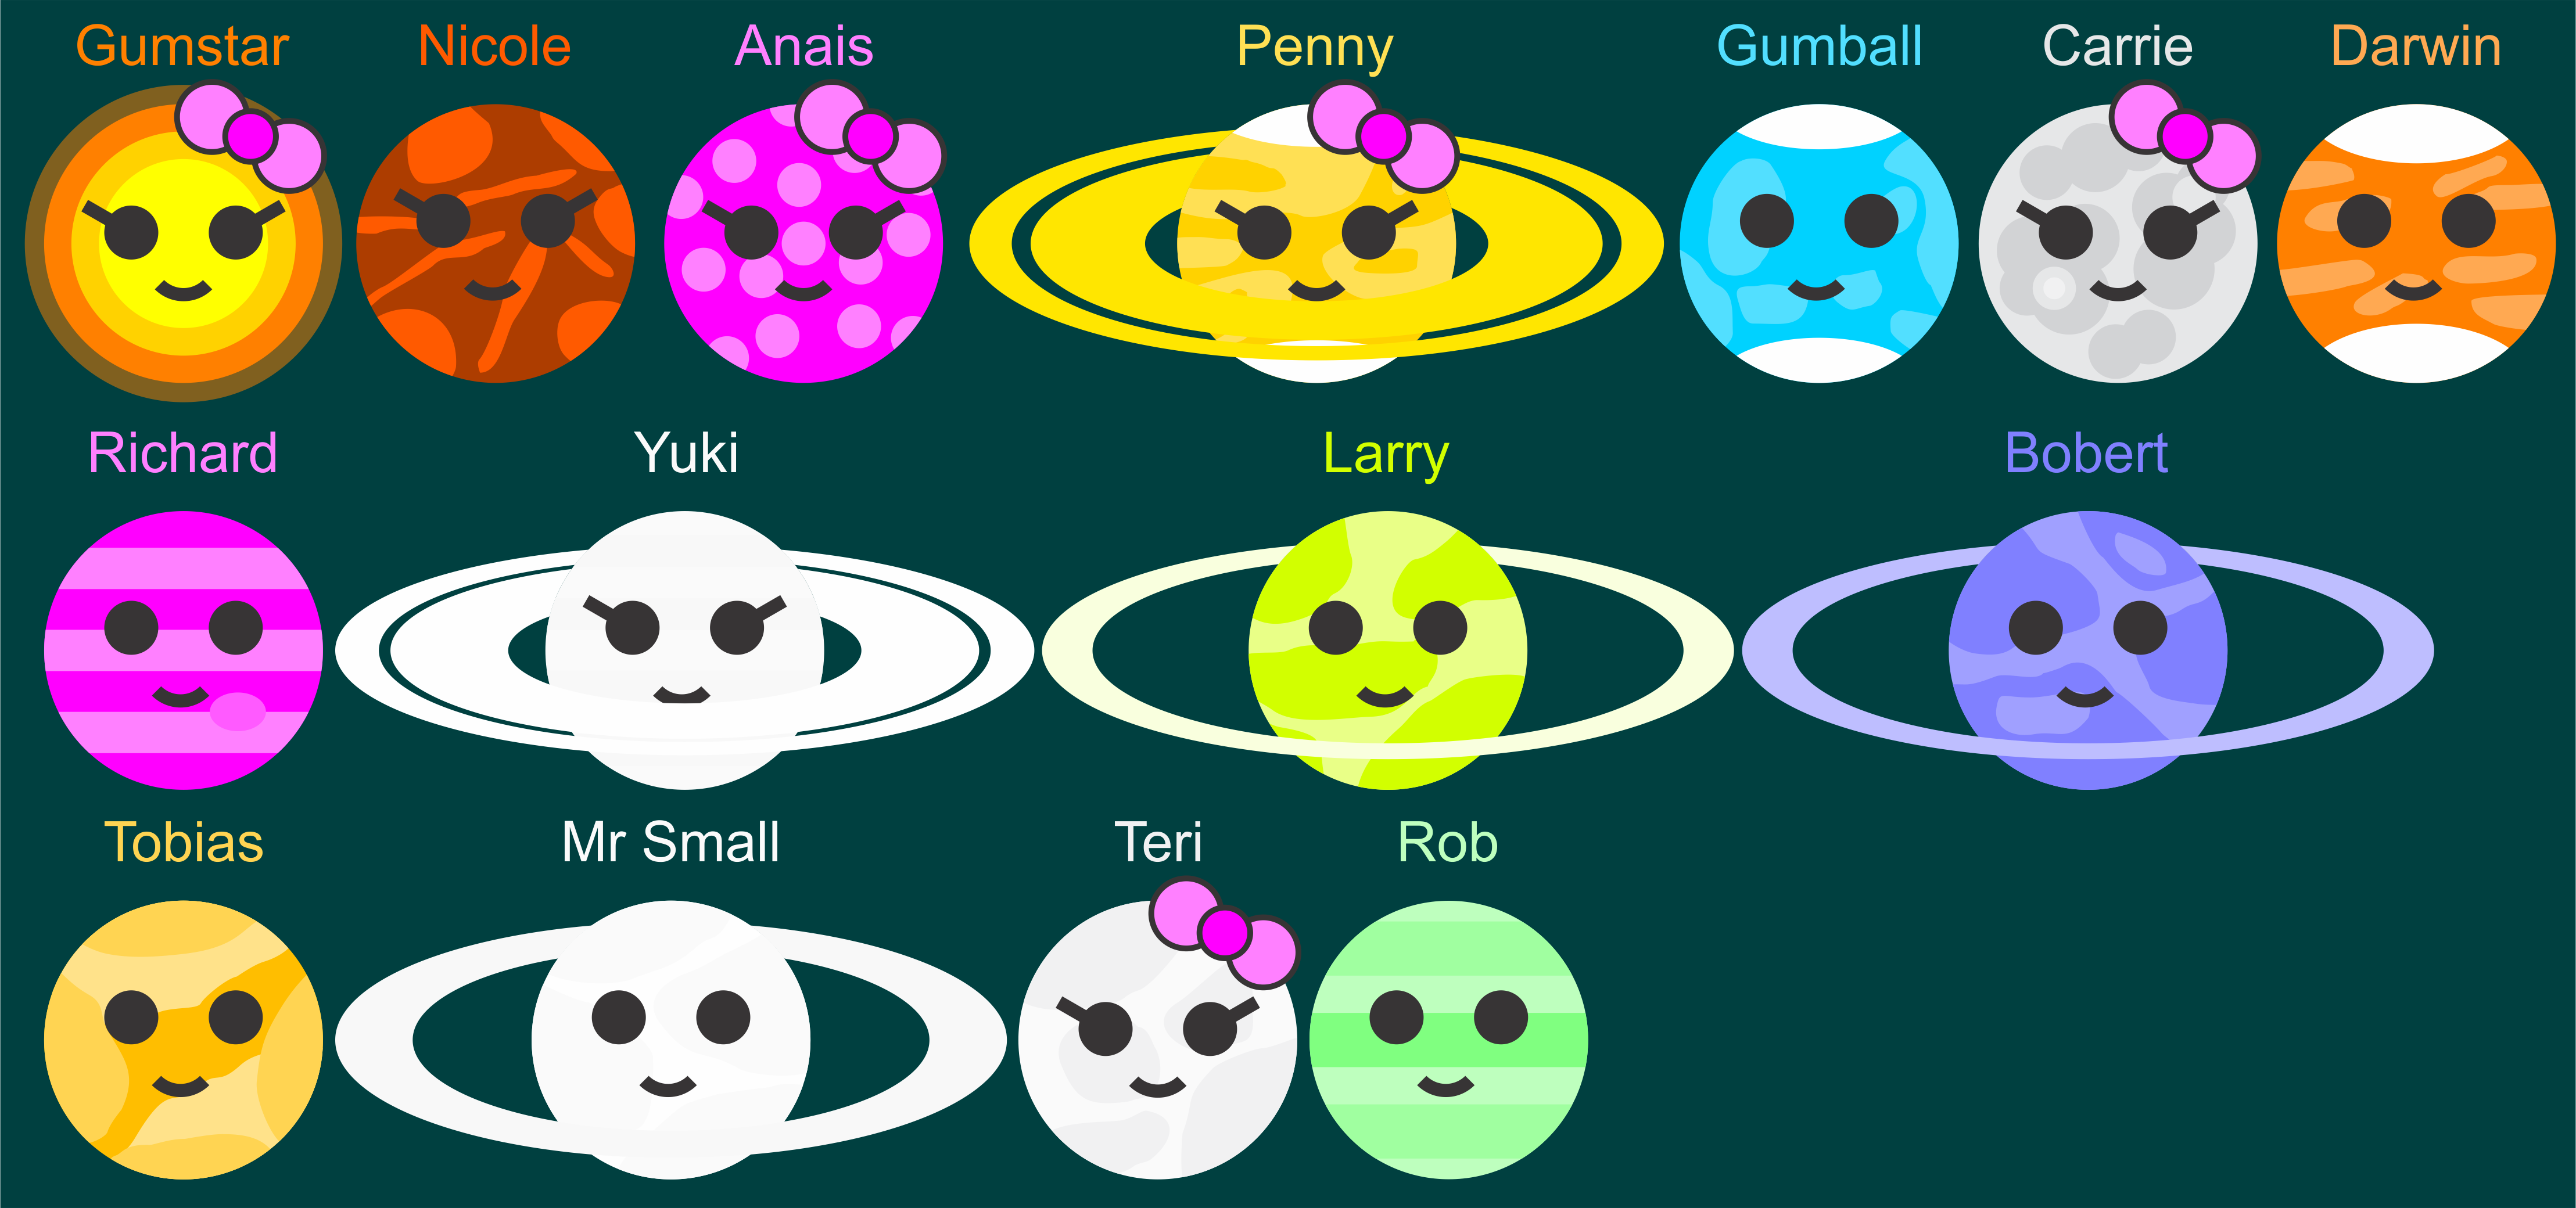 Just Shapes And Beats OC Characters Chart by jordanli04 on DeviantArt